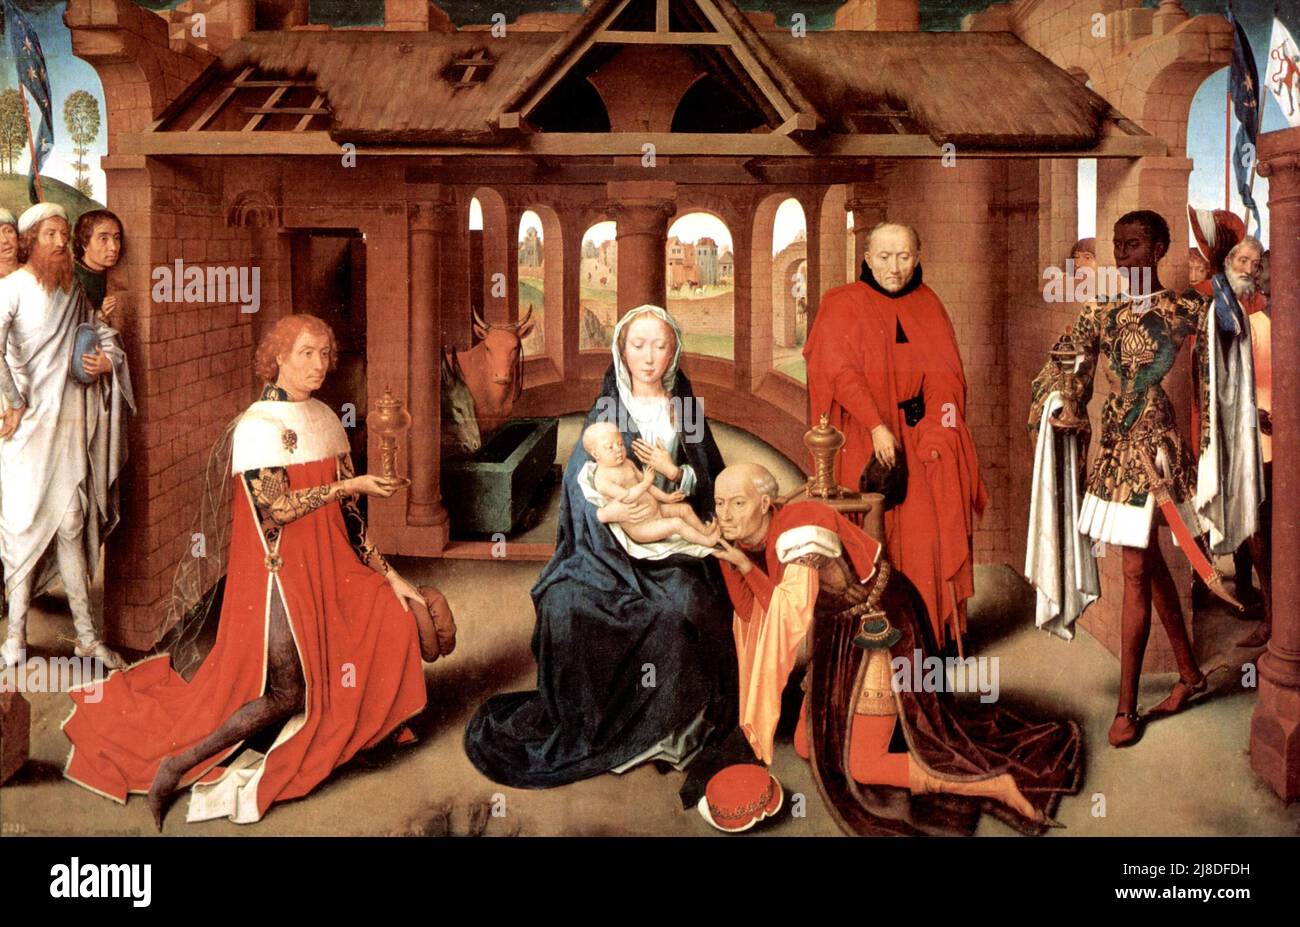 The Adoration of the Magi by Hans Memling. In this christian myth three wise men or kings come to visit the newborn jesus and acknowledge him as the messiah and son of god. Stock Photo